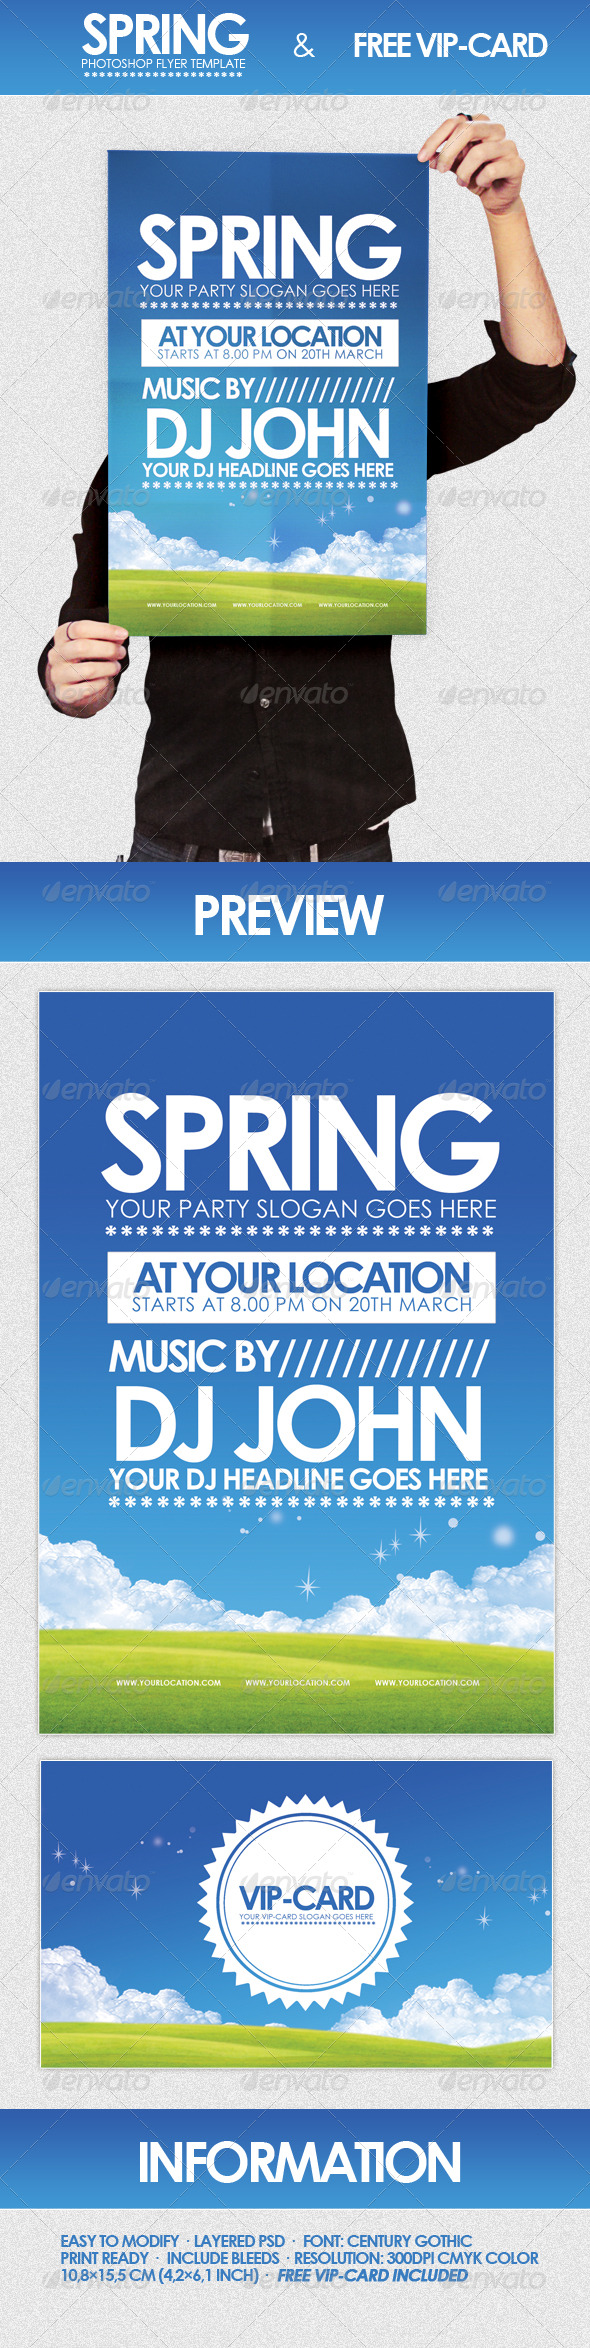 Spring - Flyer Template